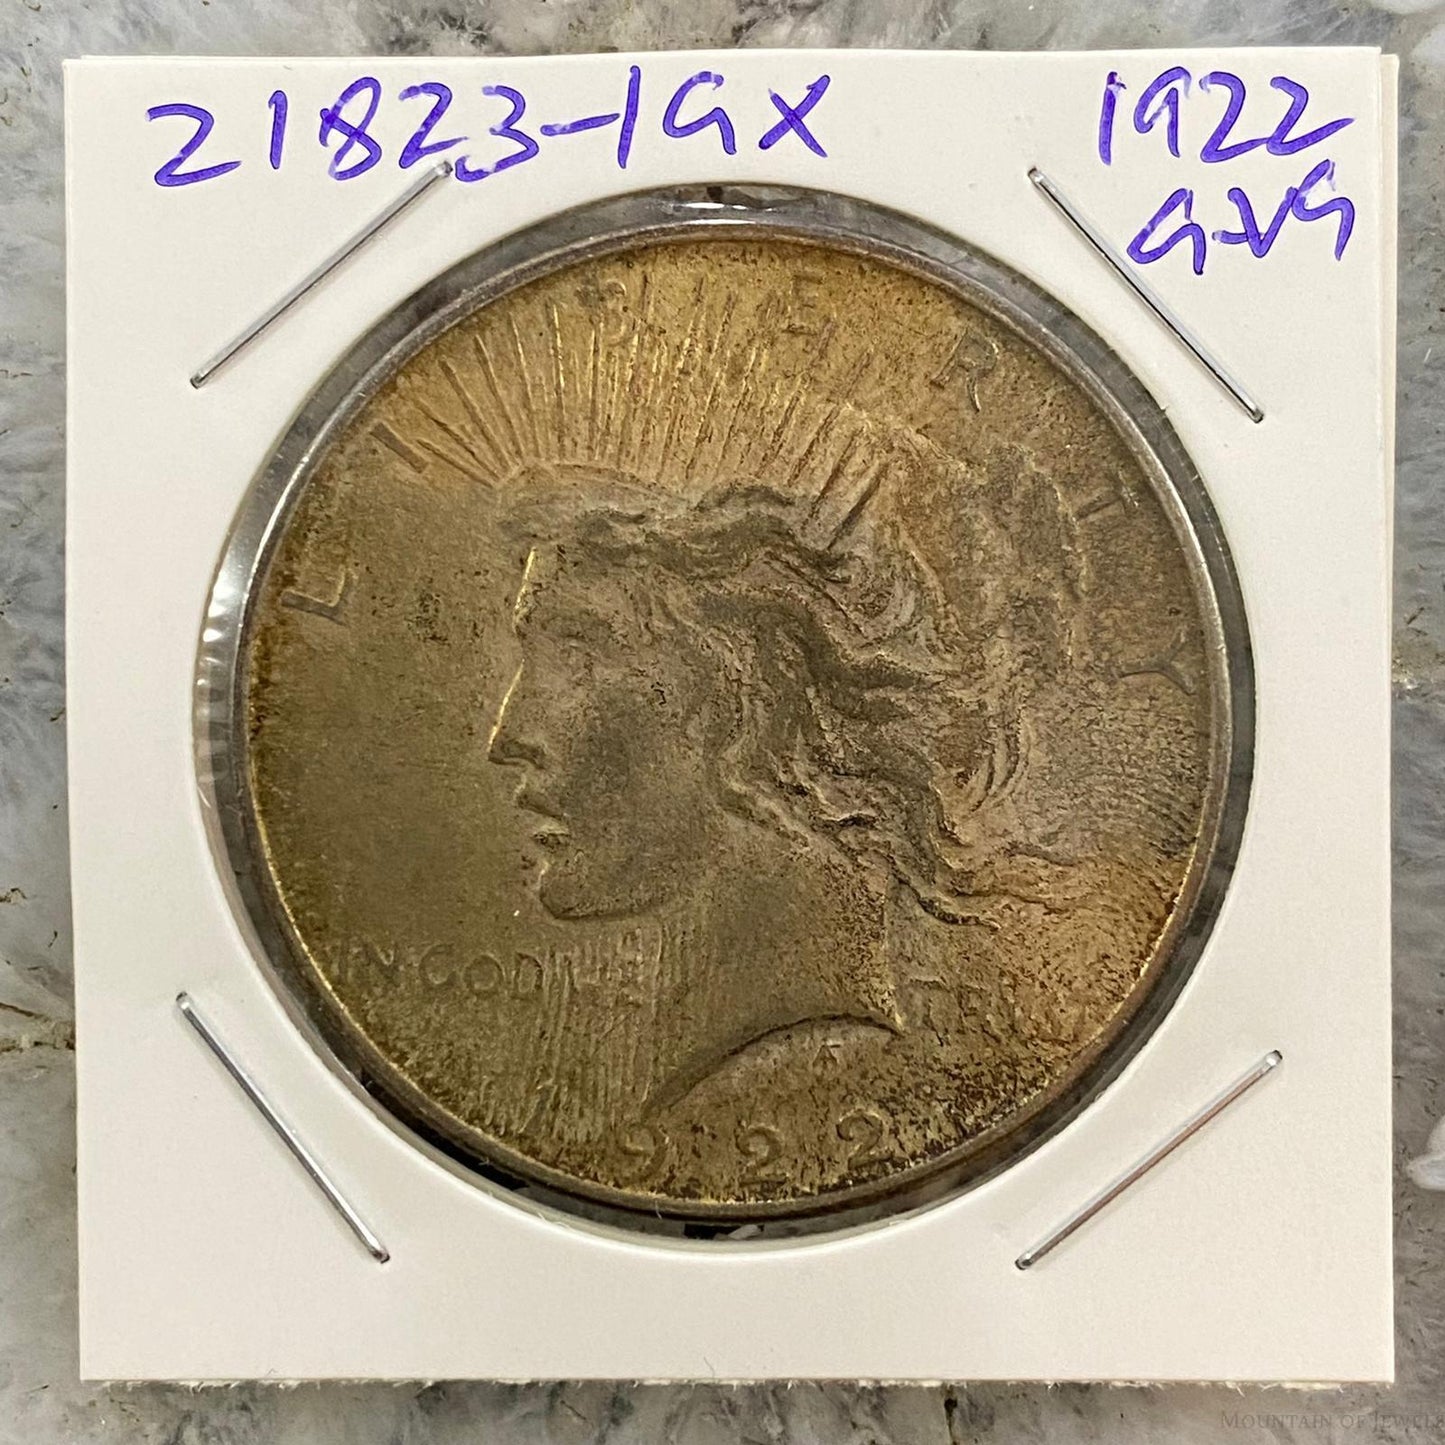 1922 $1 US Peace Silver Dollar G-VG Collectible Coin #21823-1GX - Mountain of Jewels